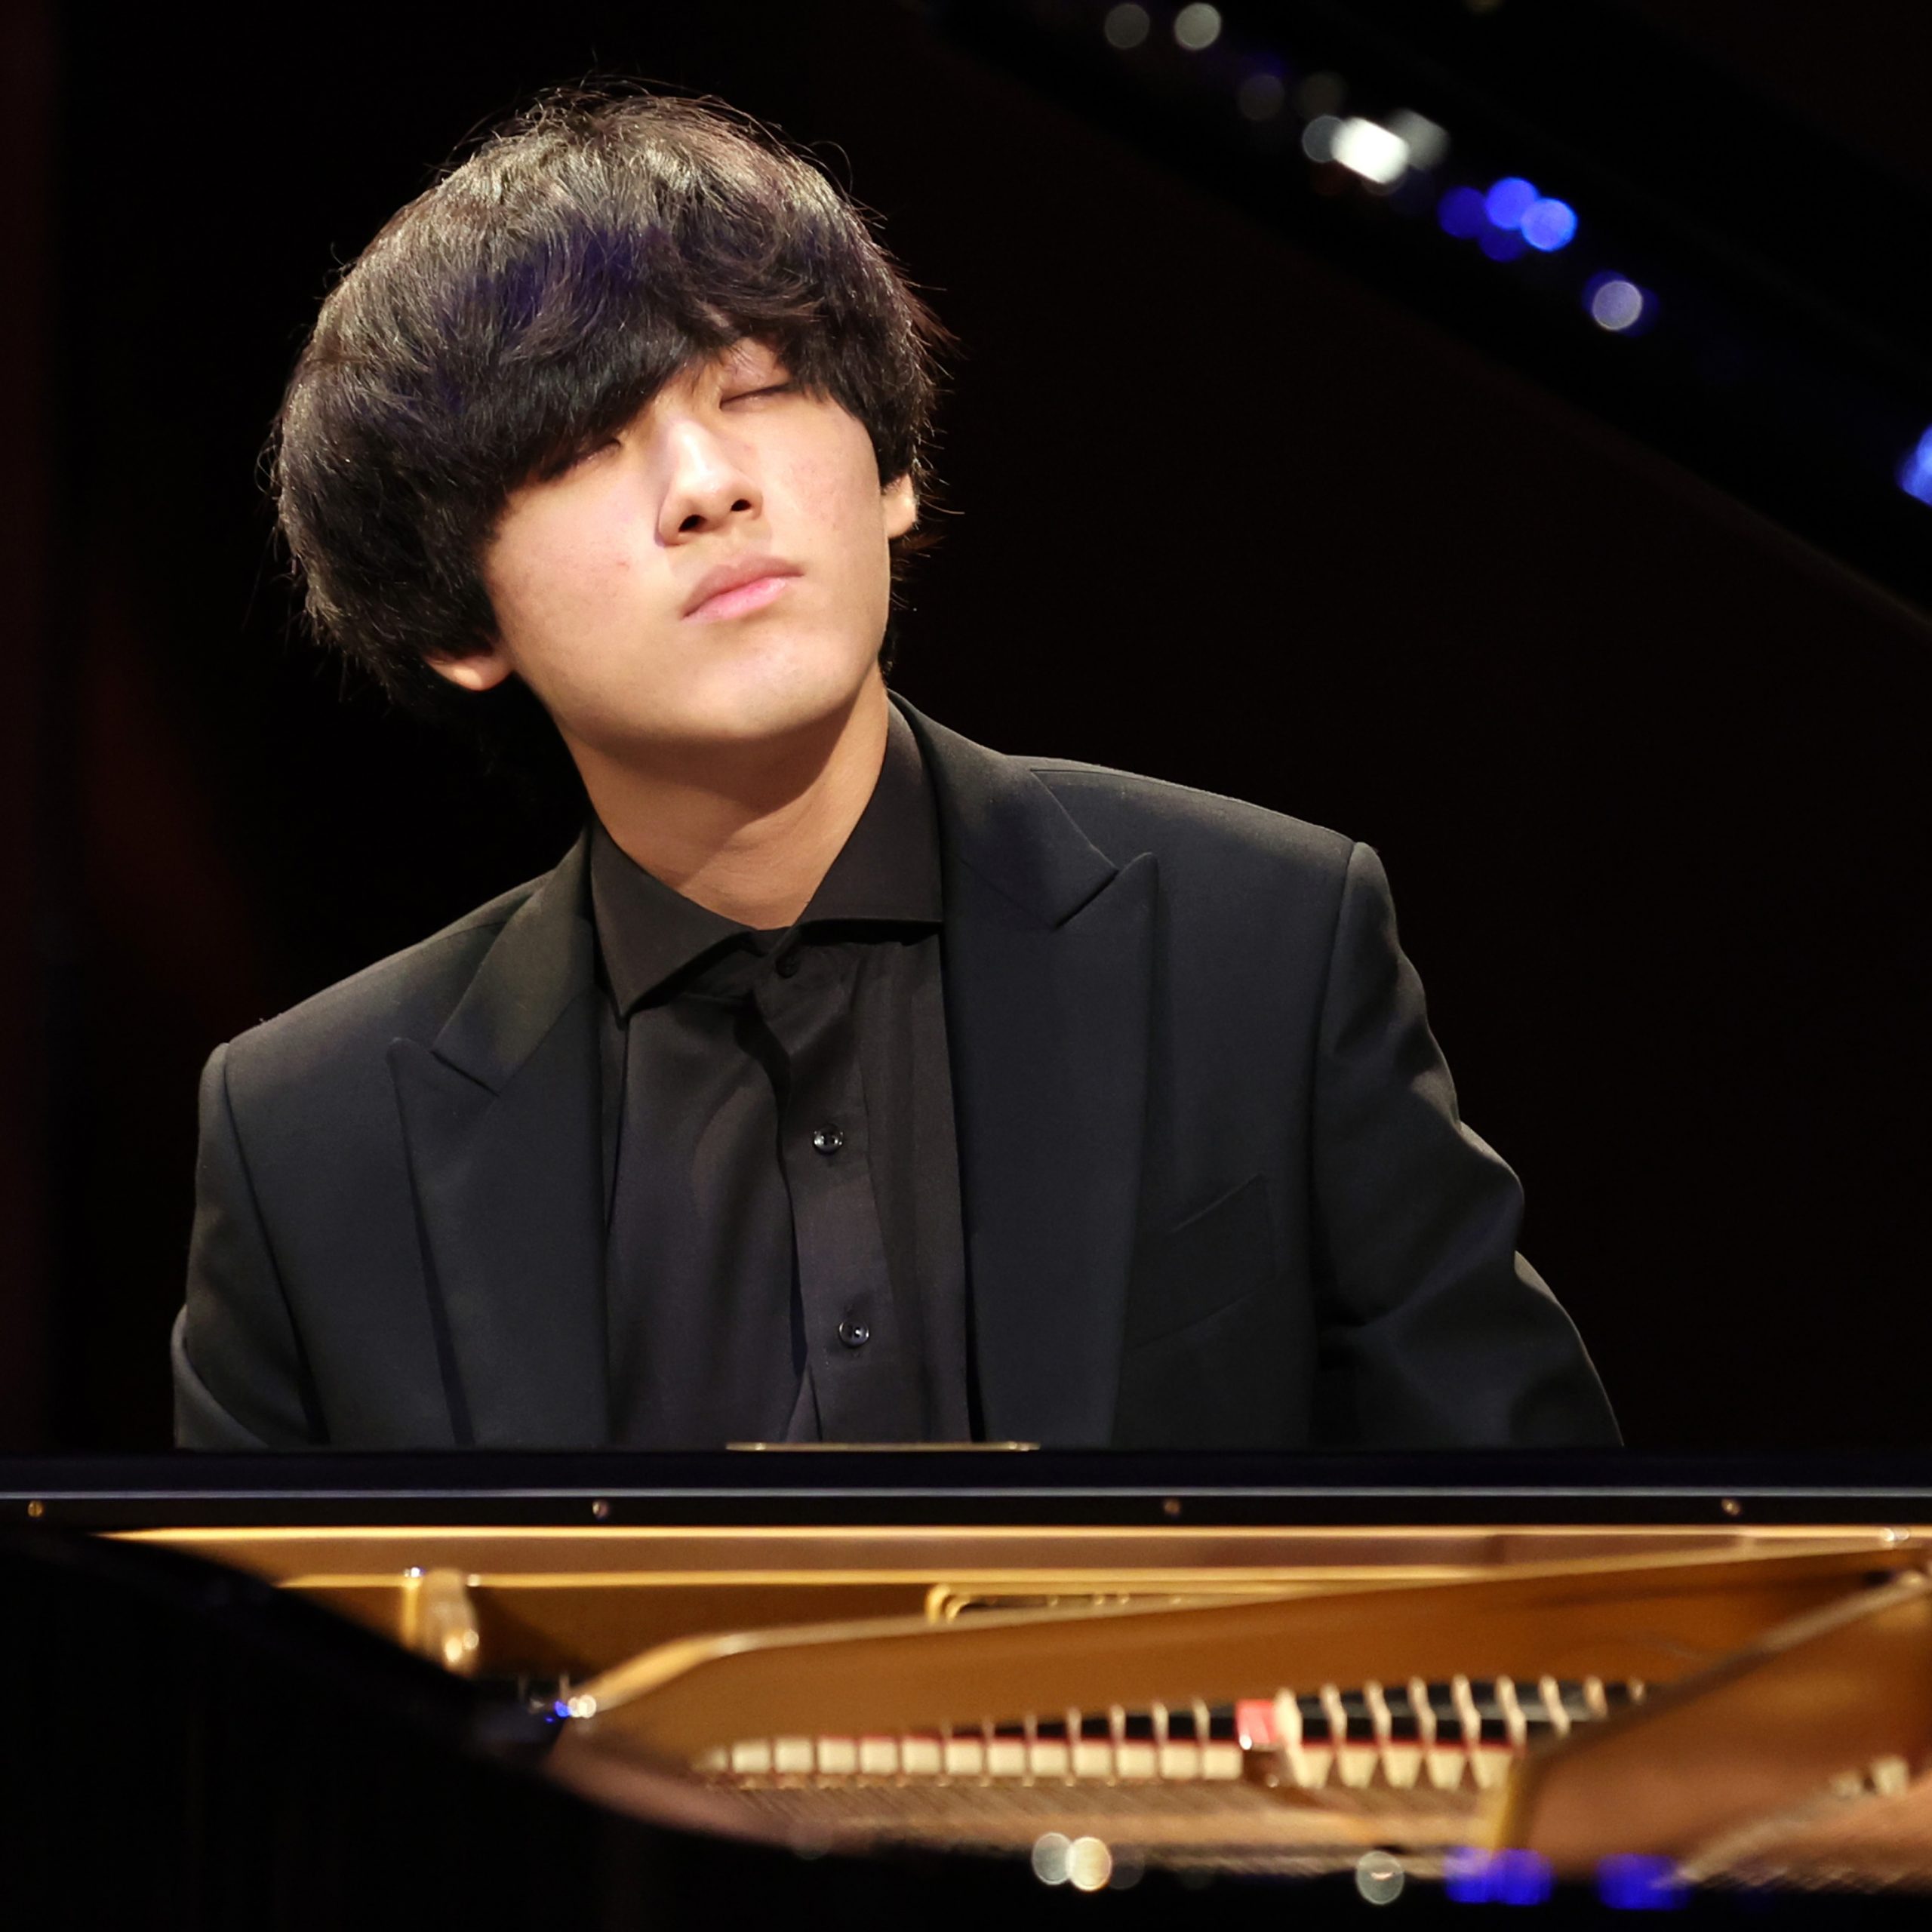 Israel's Rubinstein Piano Competition Announces 2023 Winners